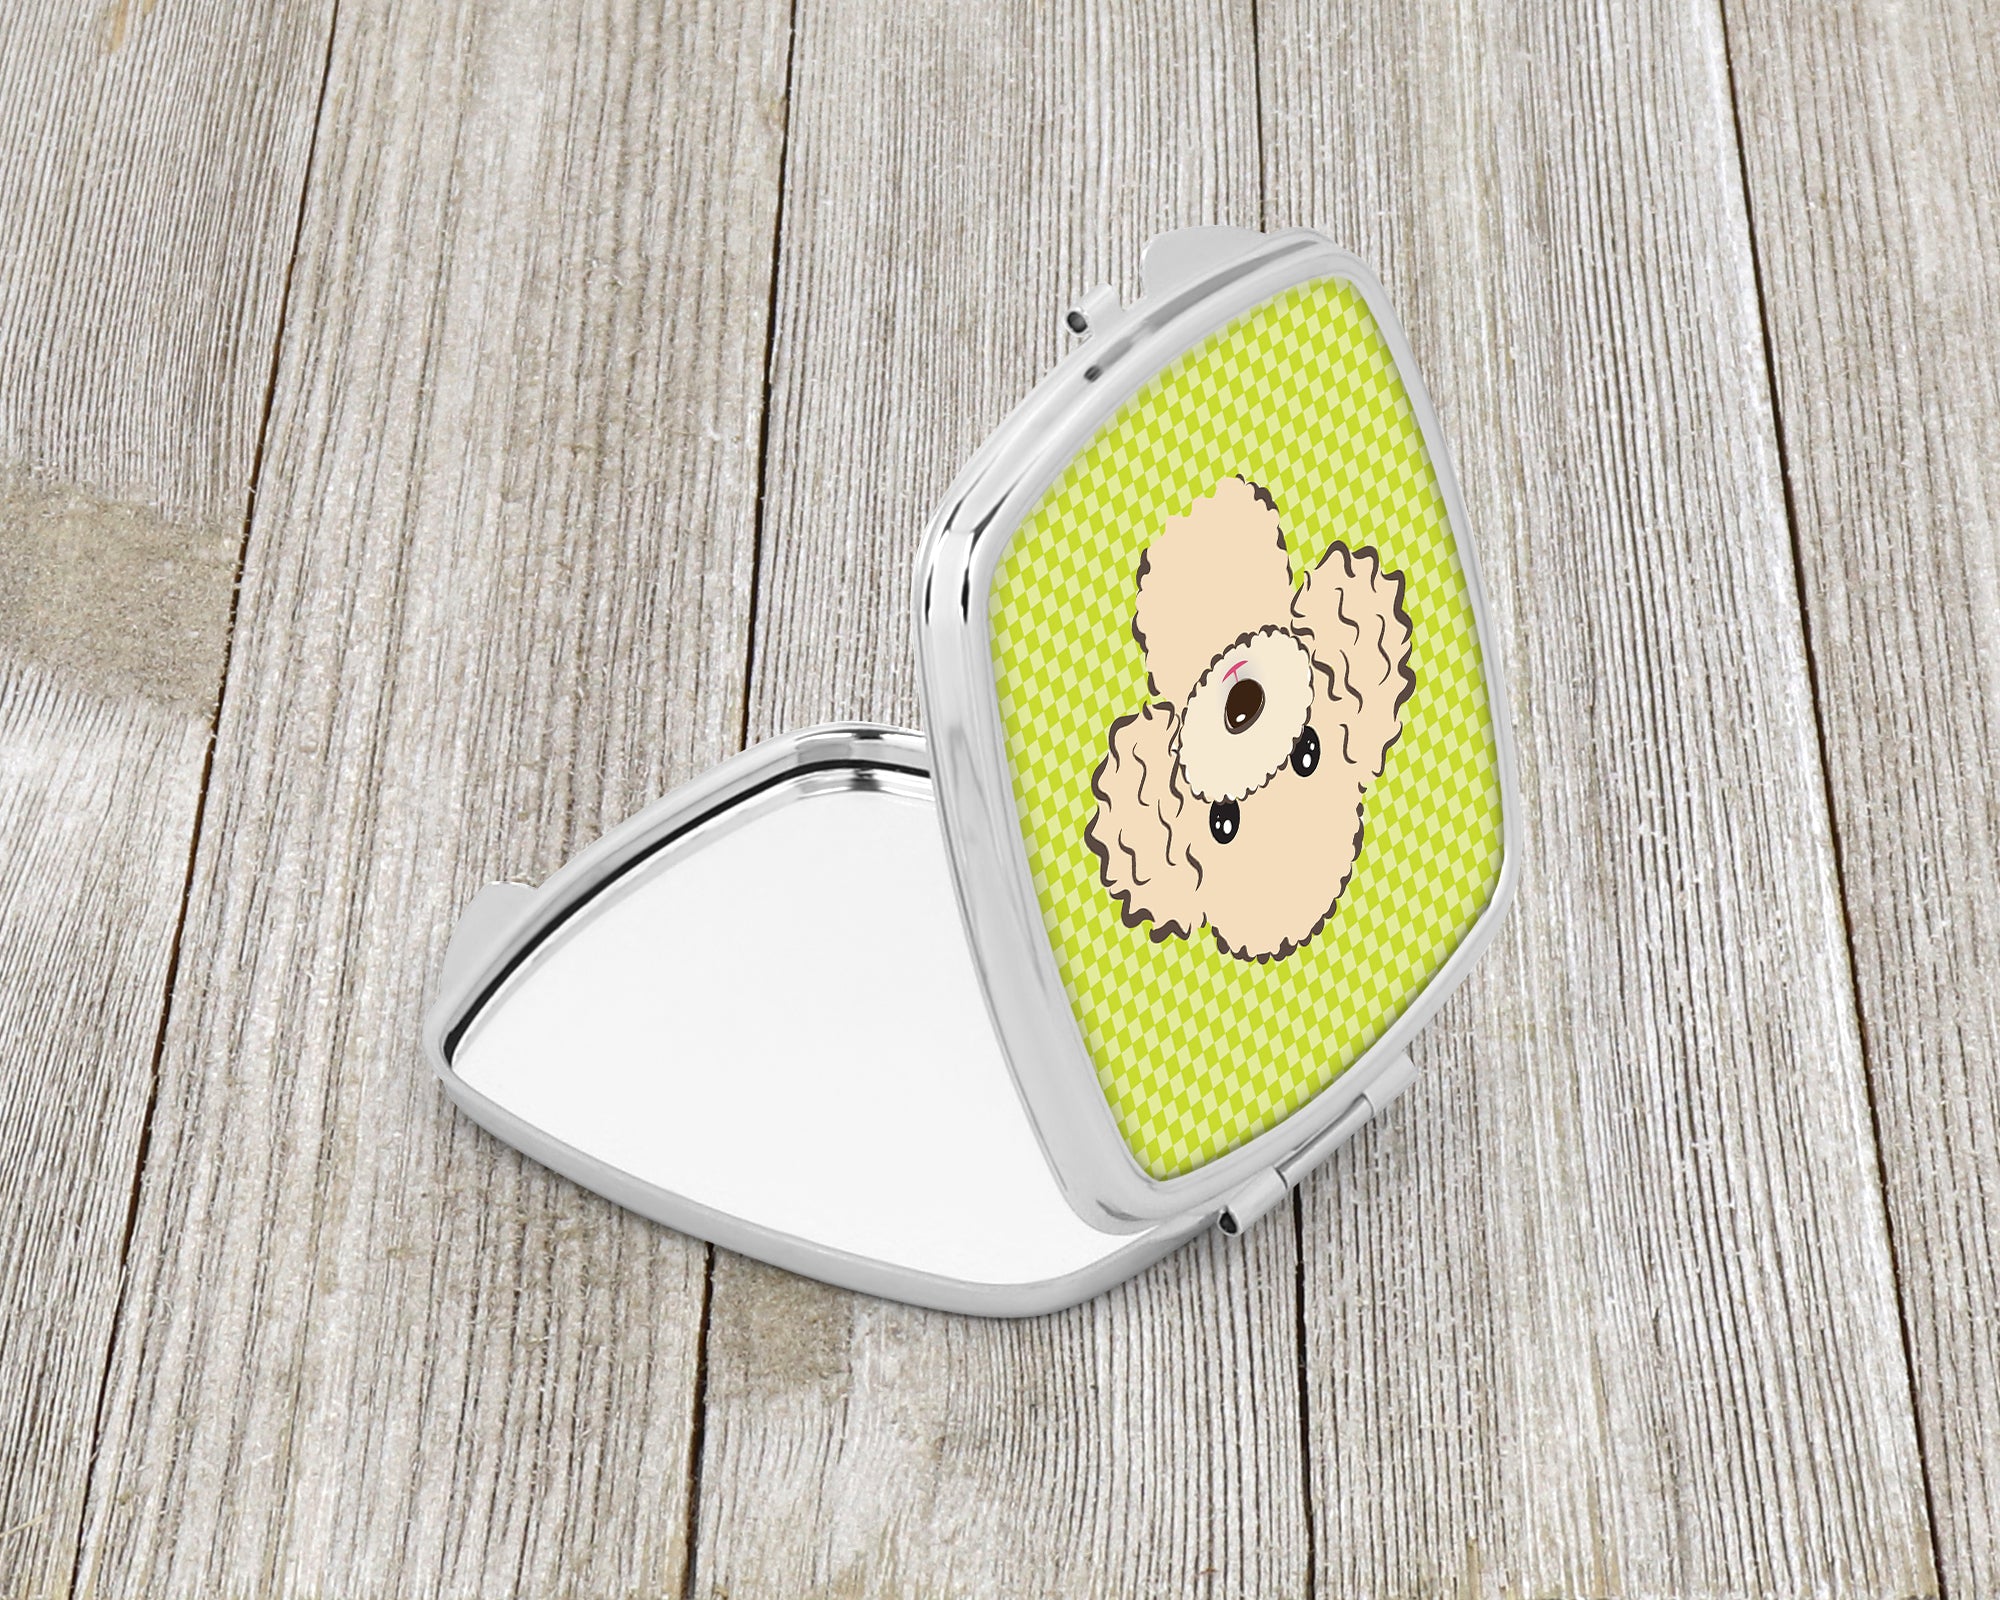 Checkerboard Lime Green Buff Poodle Compact Mirror BB1320SCM  the-store.com.